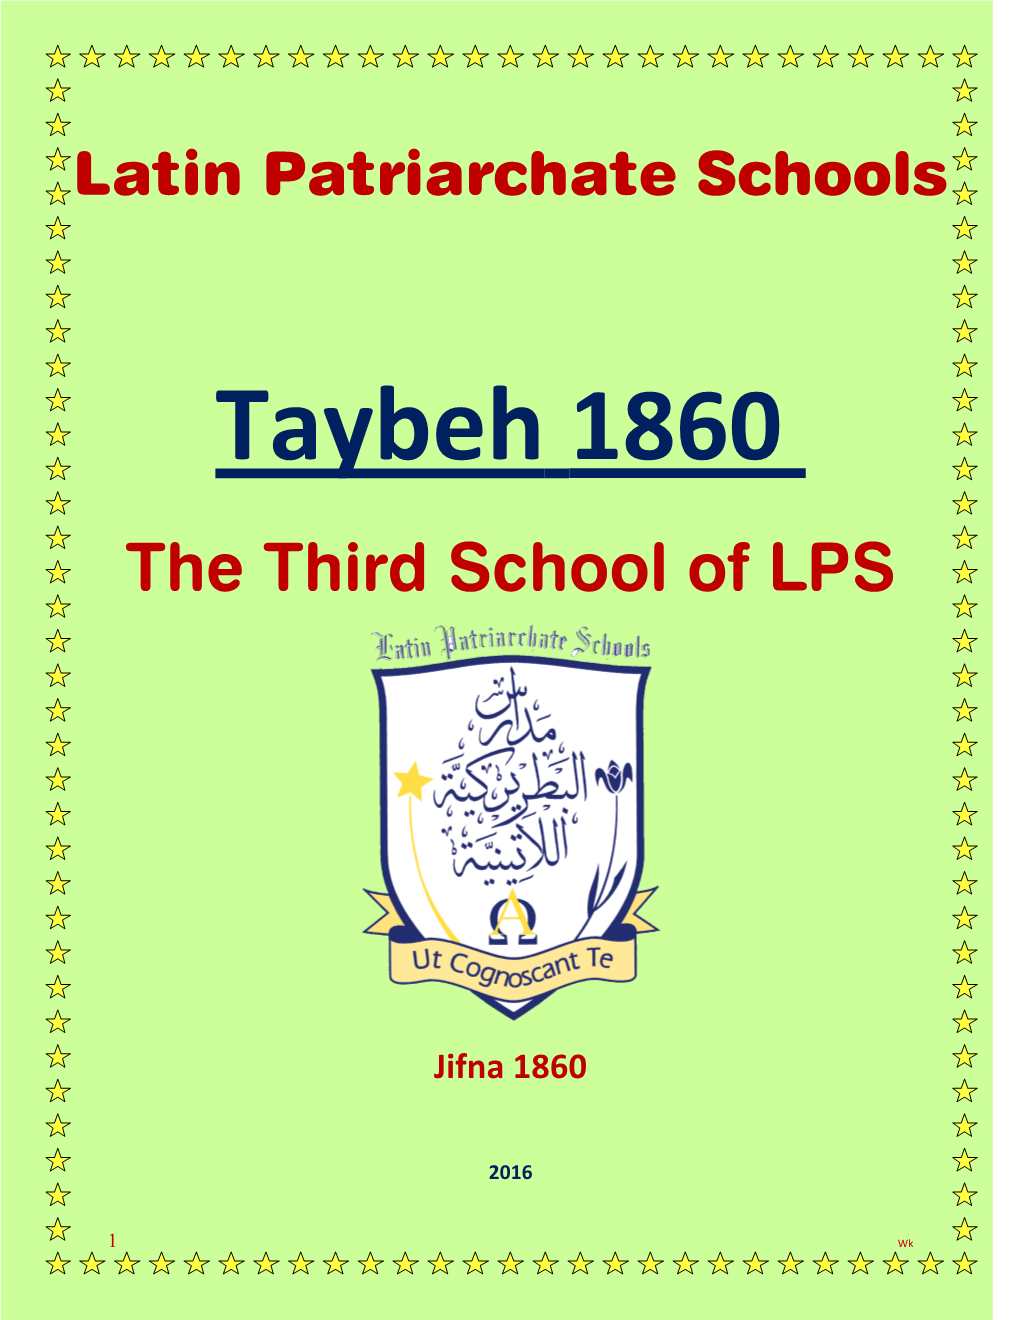 Taybeh 1860 the Third School of LPS